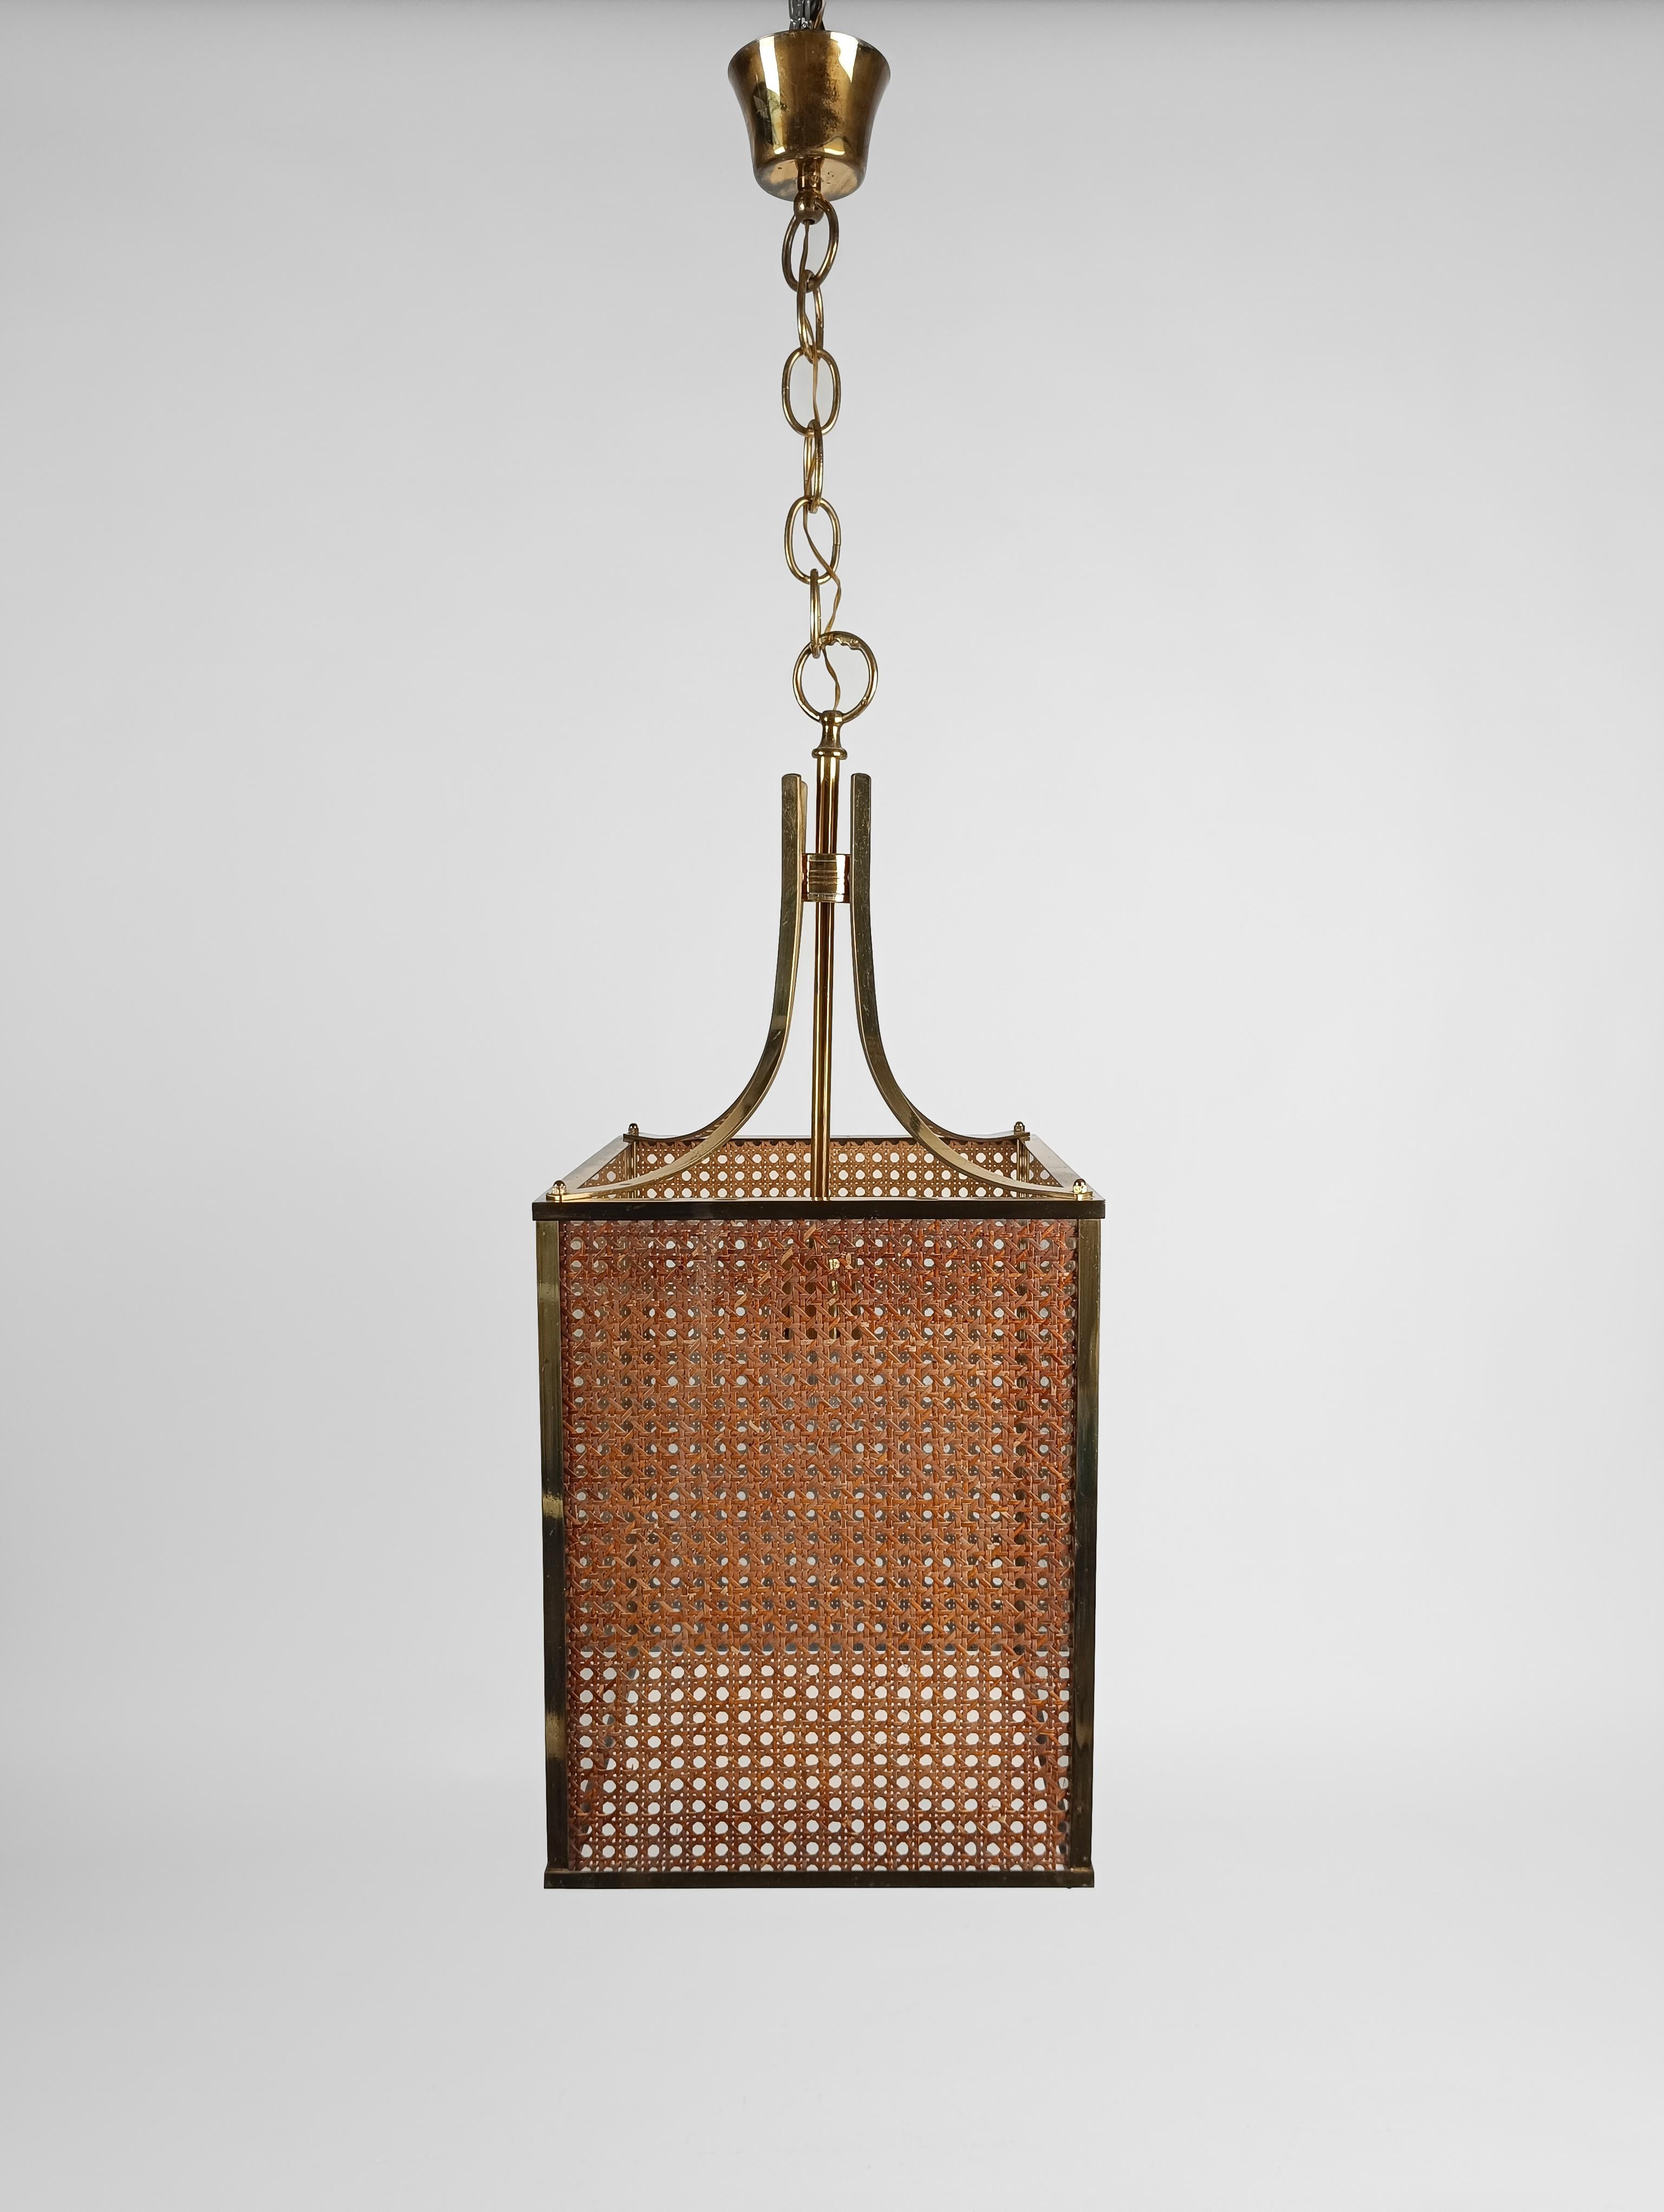 Late 20th Century 70s Pendant Light made in Brass Glass & Cane Webbing, Chinese Chippendale style  For Sale